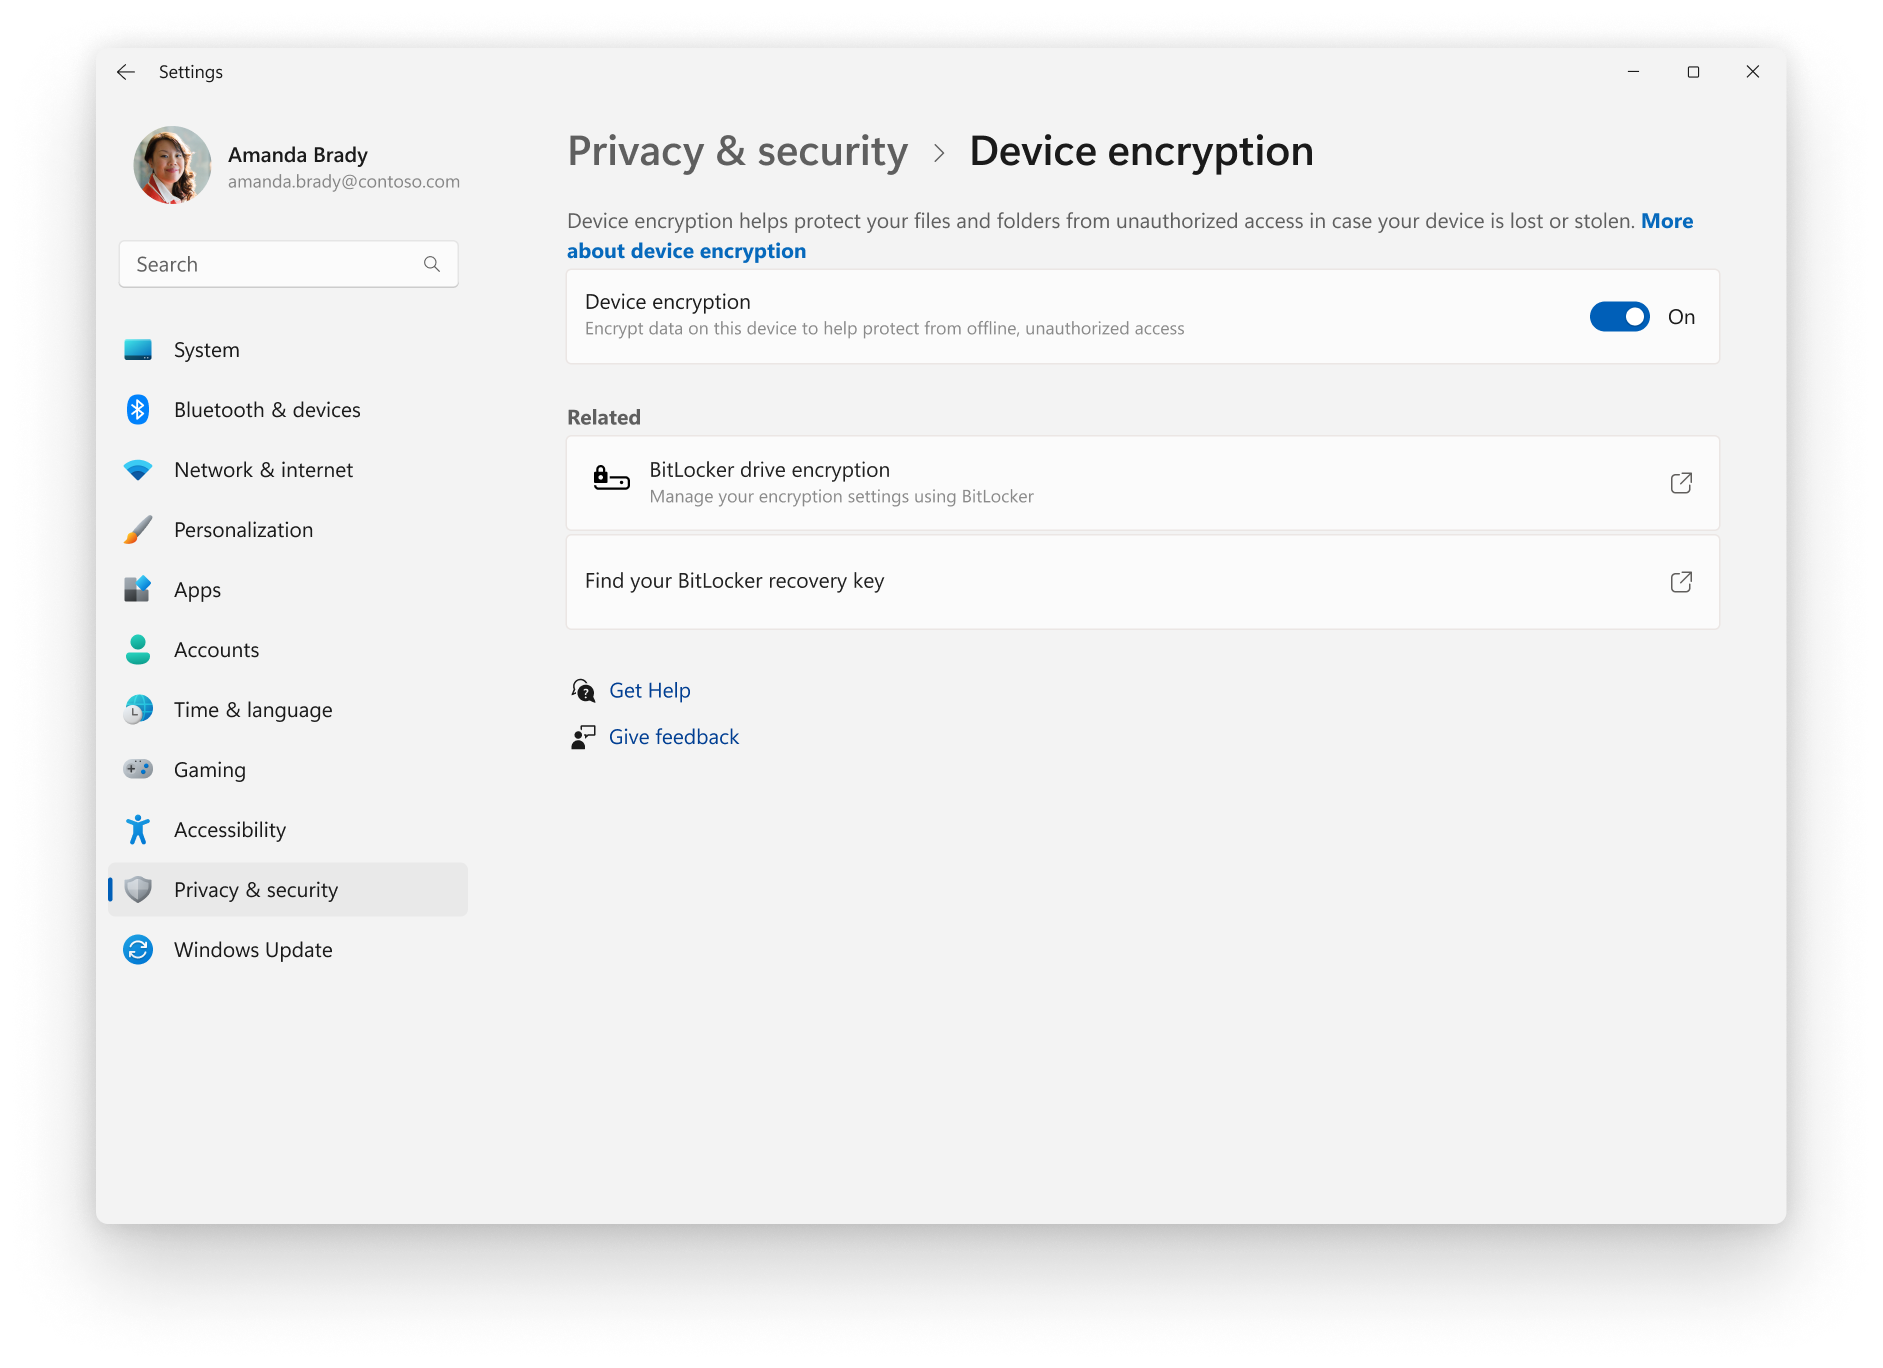 Screenshot of the Settings app showing the device encryption panel.